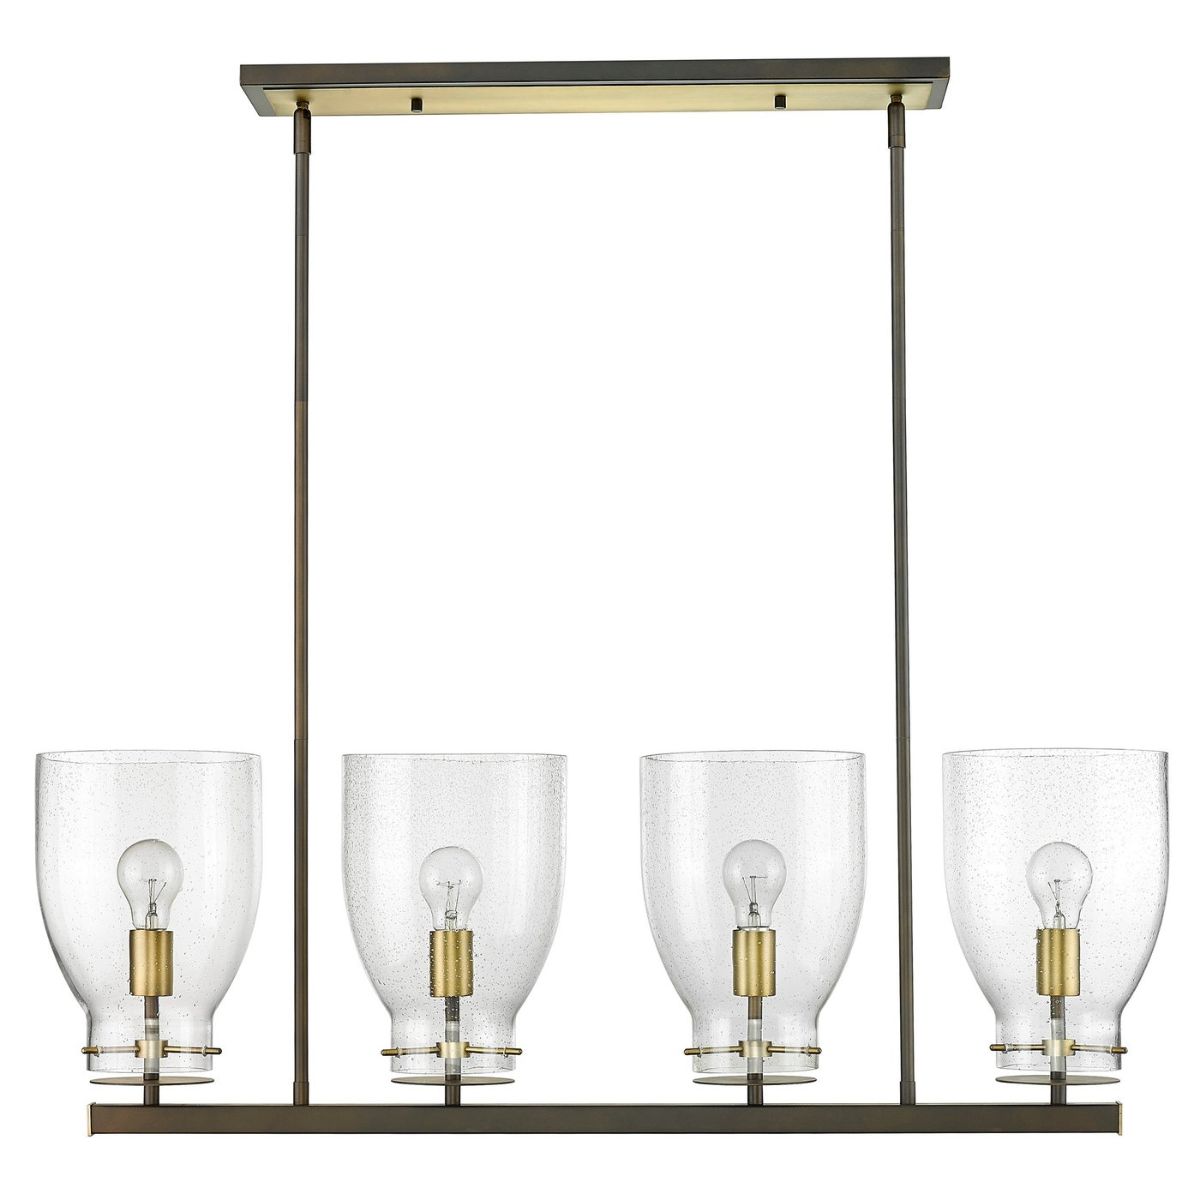 Shelby 40 in. 4 Lights Chandelier Oil Rubbed Bronze & Antique Brass Finish